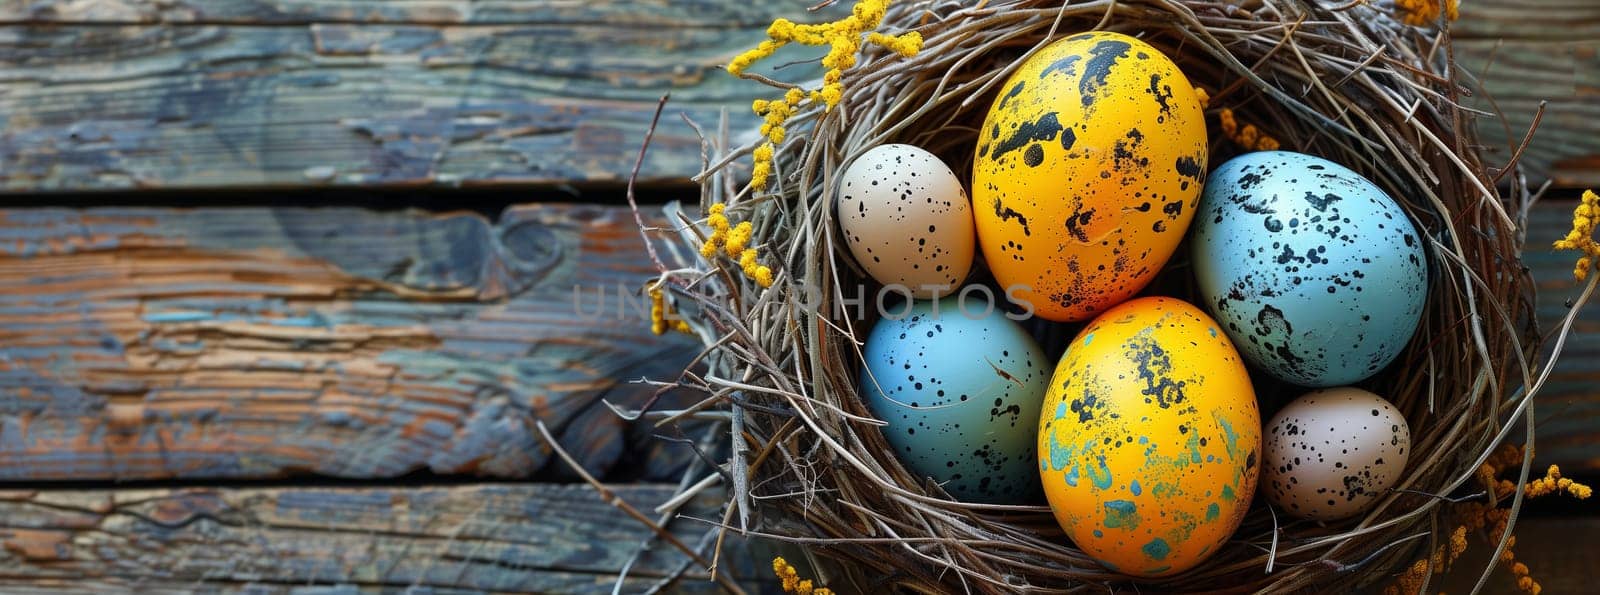 Still life photography of colorful Easter eggs in a nest on a wooden table by richwolf